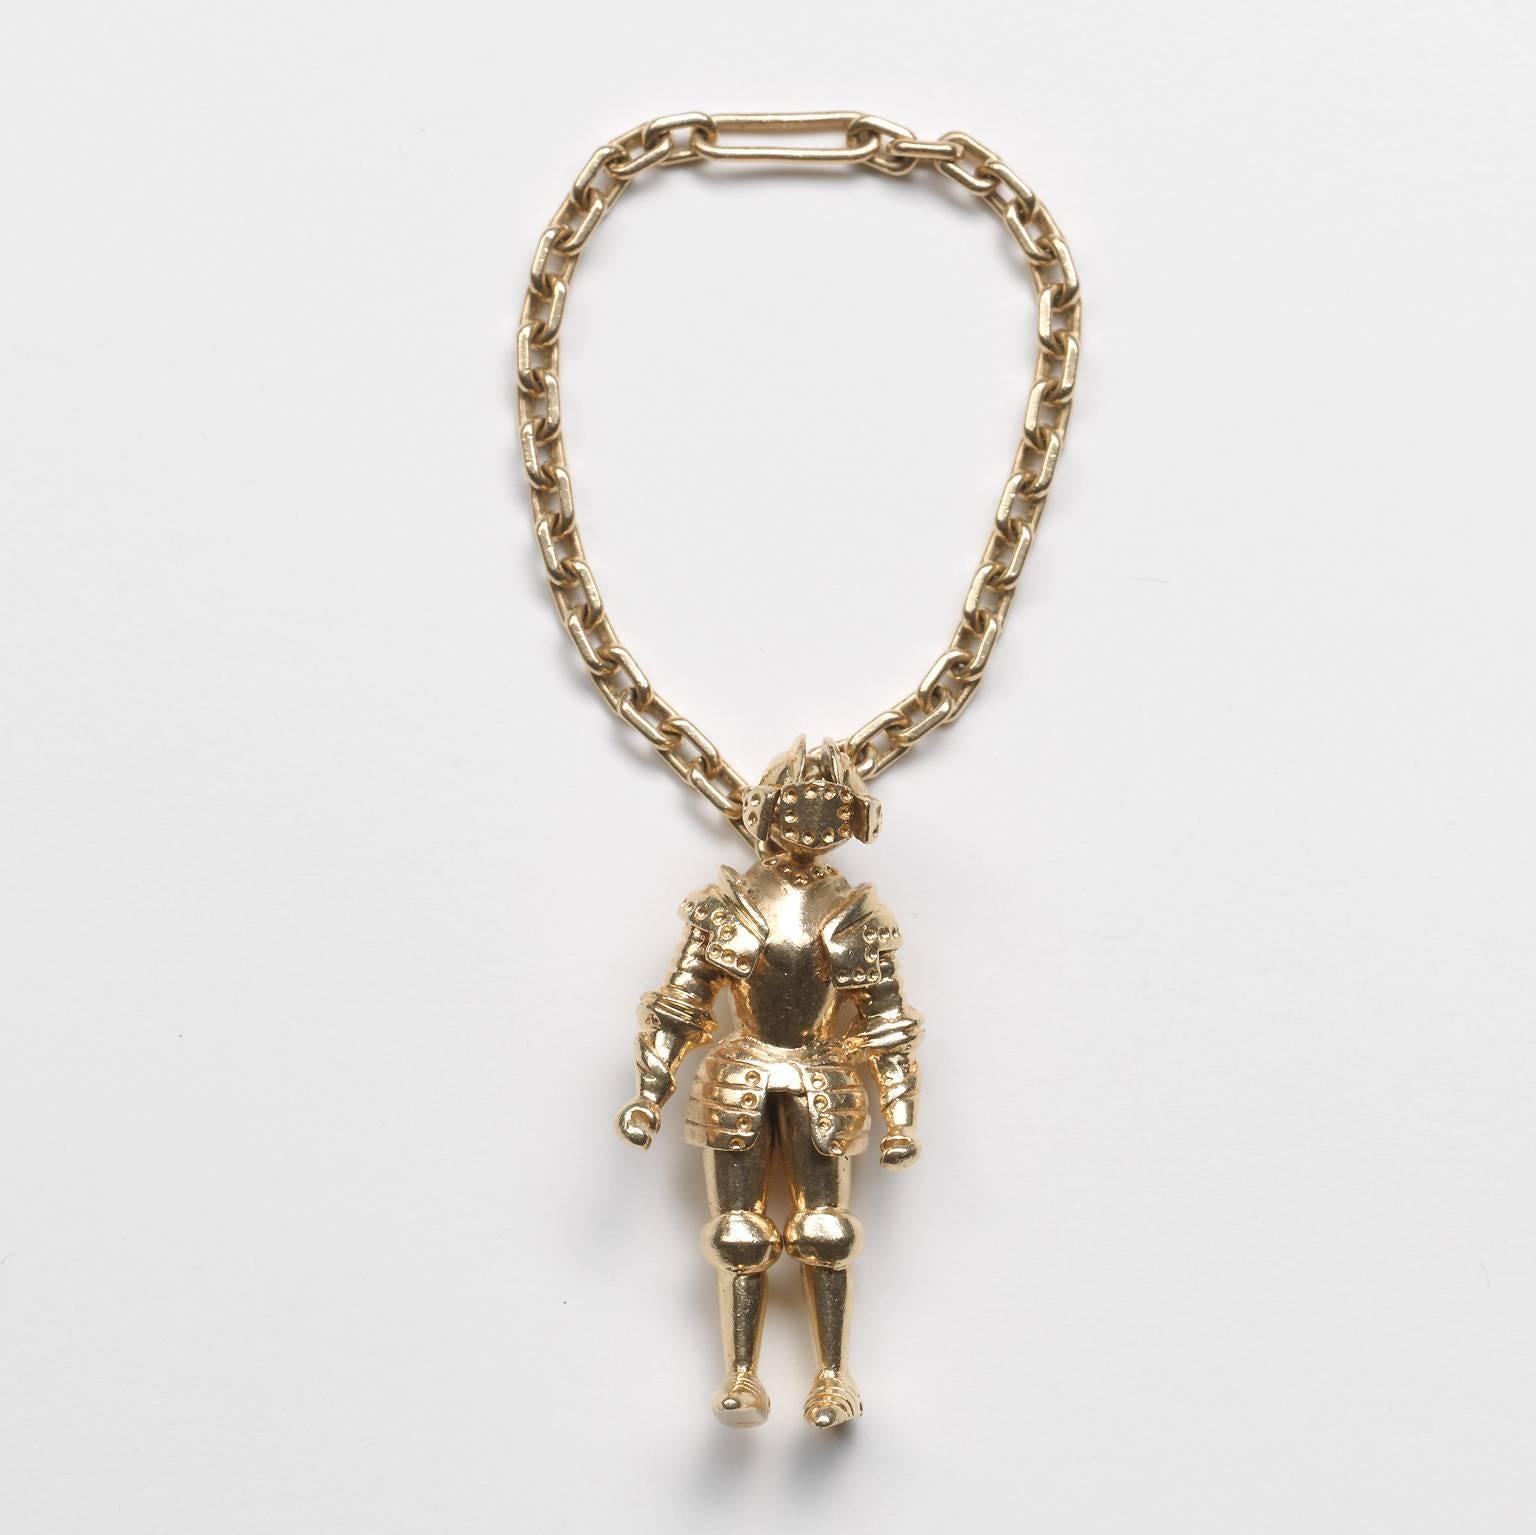 A vintage 14 carat gold articulate keychain representing a knight, USA.

weight: 21.4 grams
dimensions: 4.2 x 2 cm